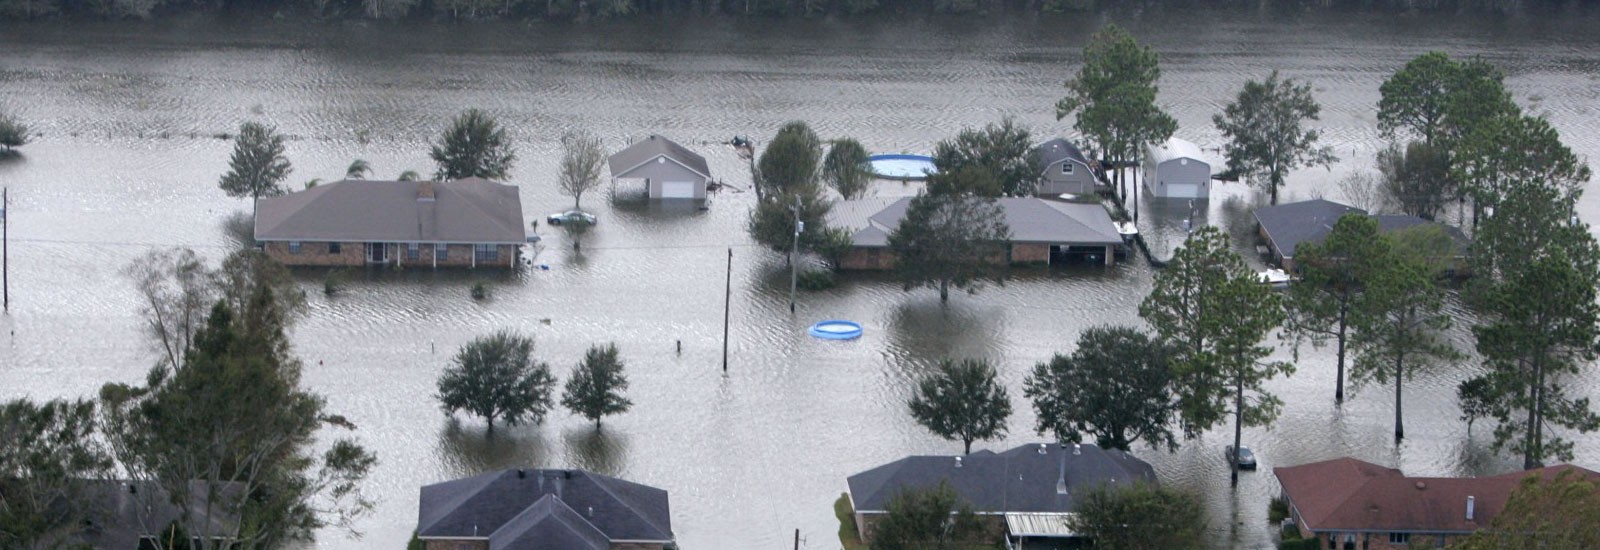 Aerial view of damage done by Hurricane Rita in Dularge, Louisiana on Saturday, Sept. 24, 2005